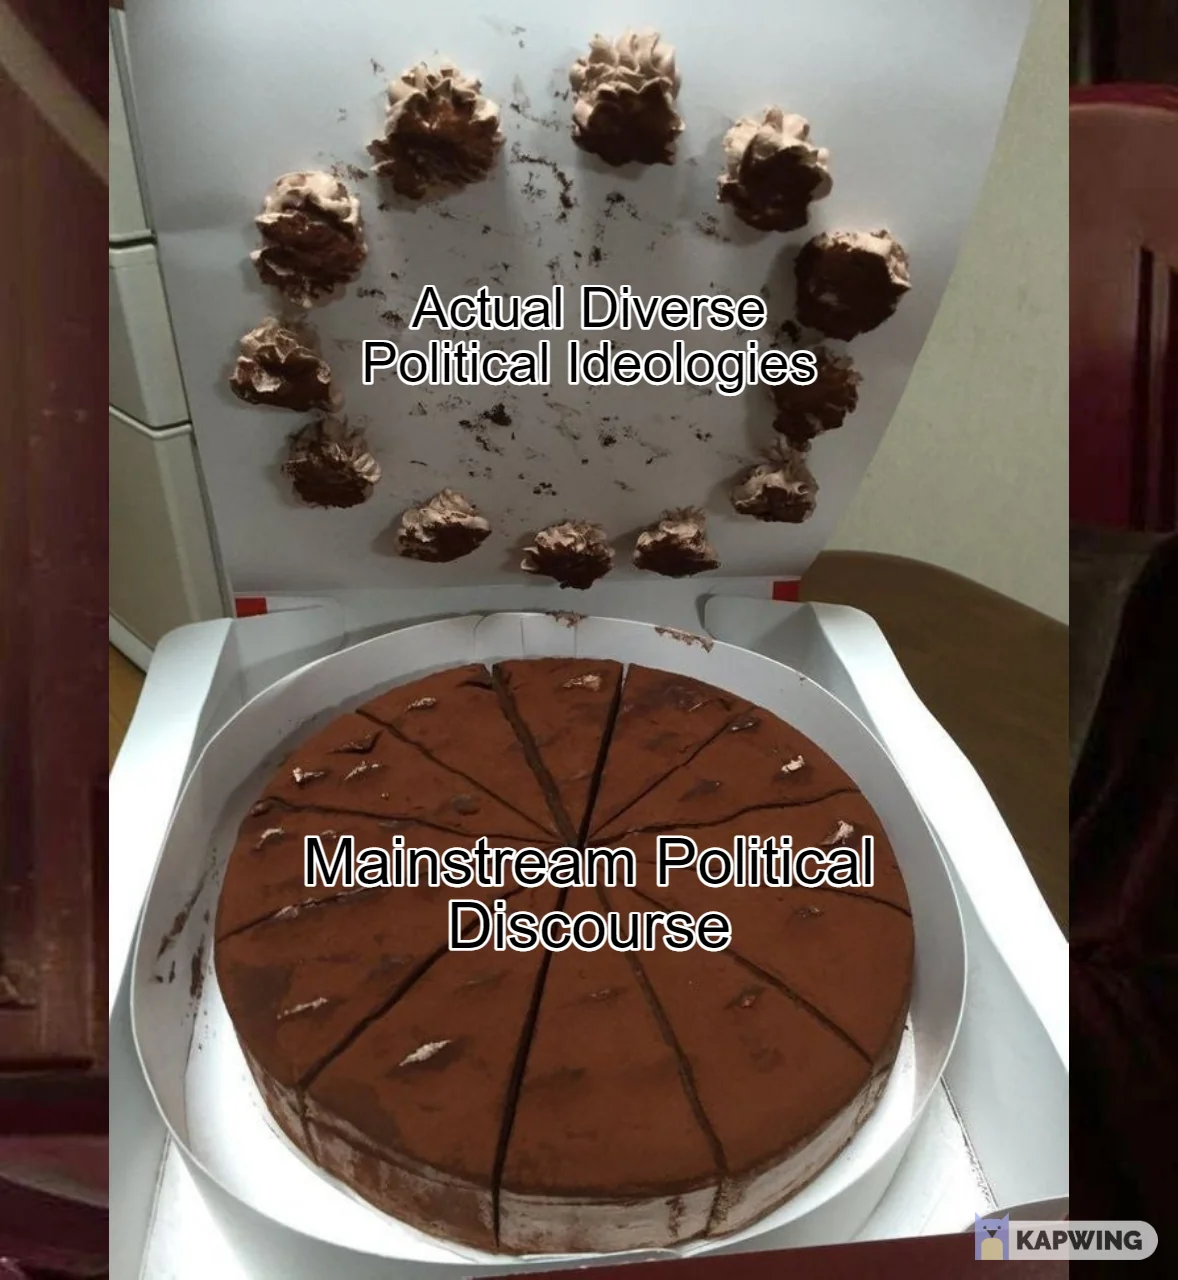 Picture is of a boxed cake which has been held closed a little too tightly, as the frosting has stuck to the roof of the
          box and been pulled off when the box was opened. The text on the cake says 'Mainstream Political Discourse' while the text
          on the frosting says 'Actual Diverse Political Ideologies